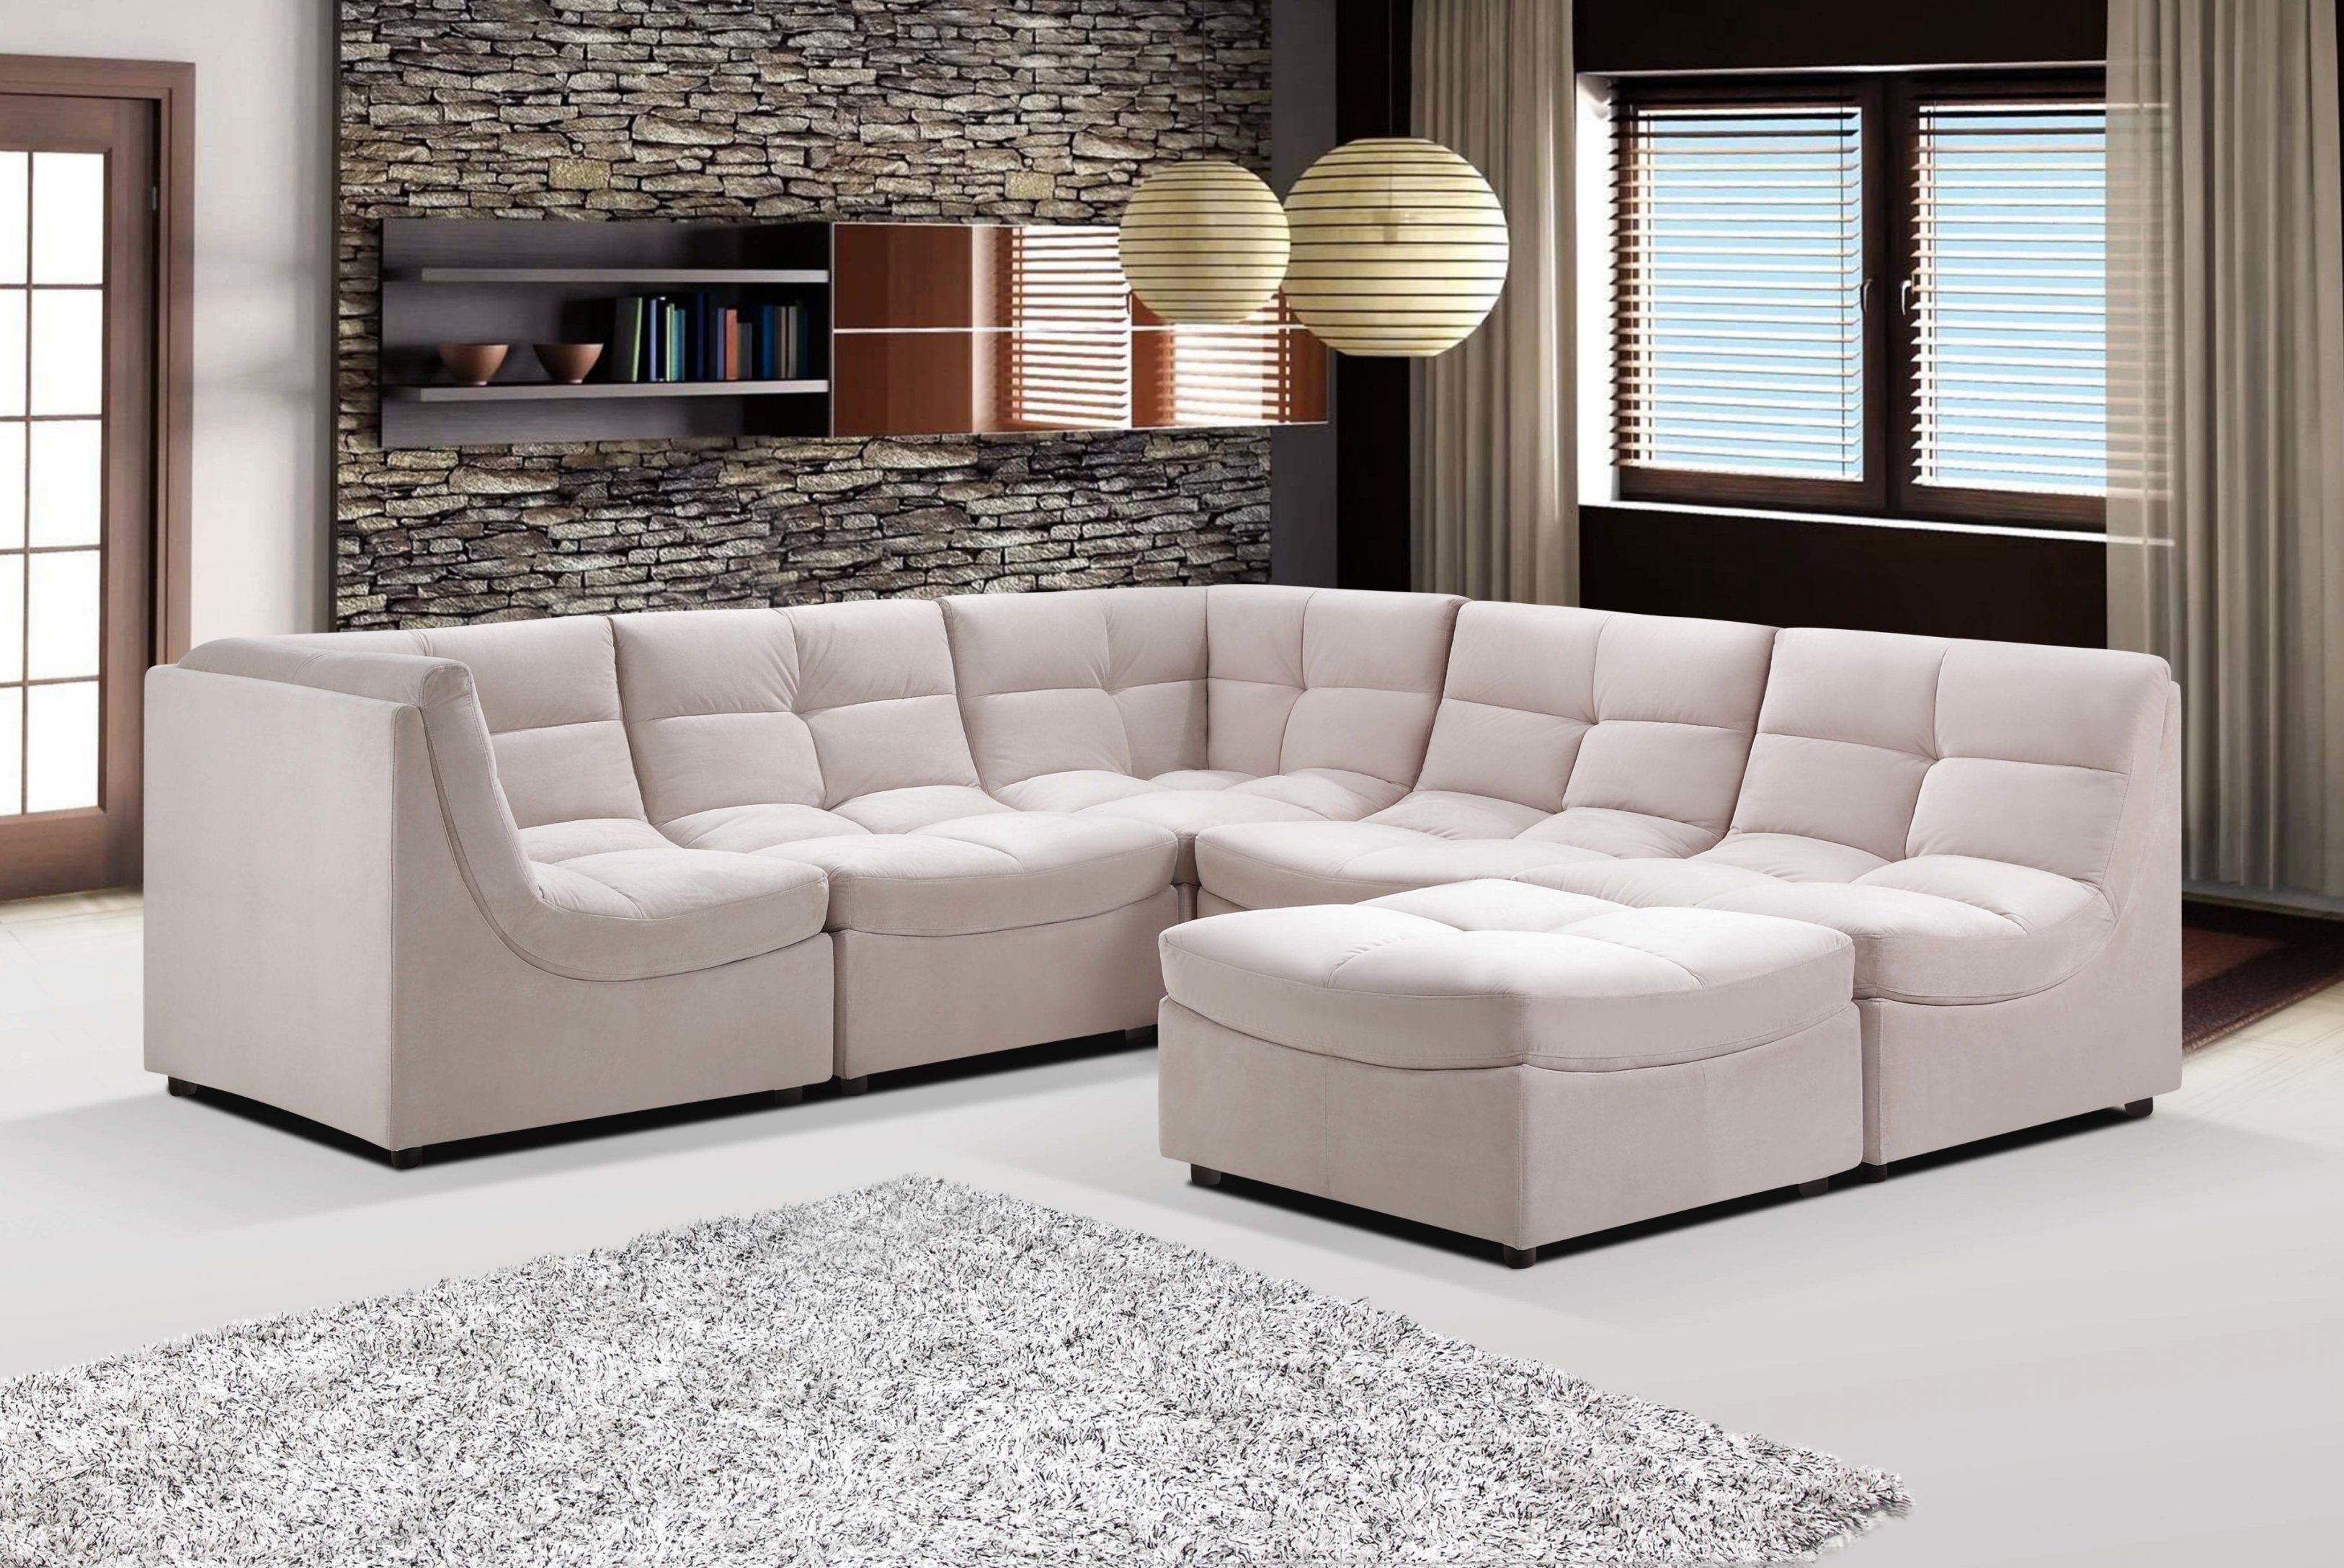 Small Modular Sectional Sofa 21 For Your Sofa Sectionals For Cloud In Small Modular Sectional Sofas (View 7 of 10)